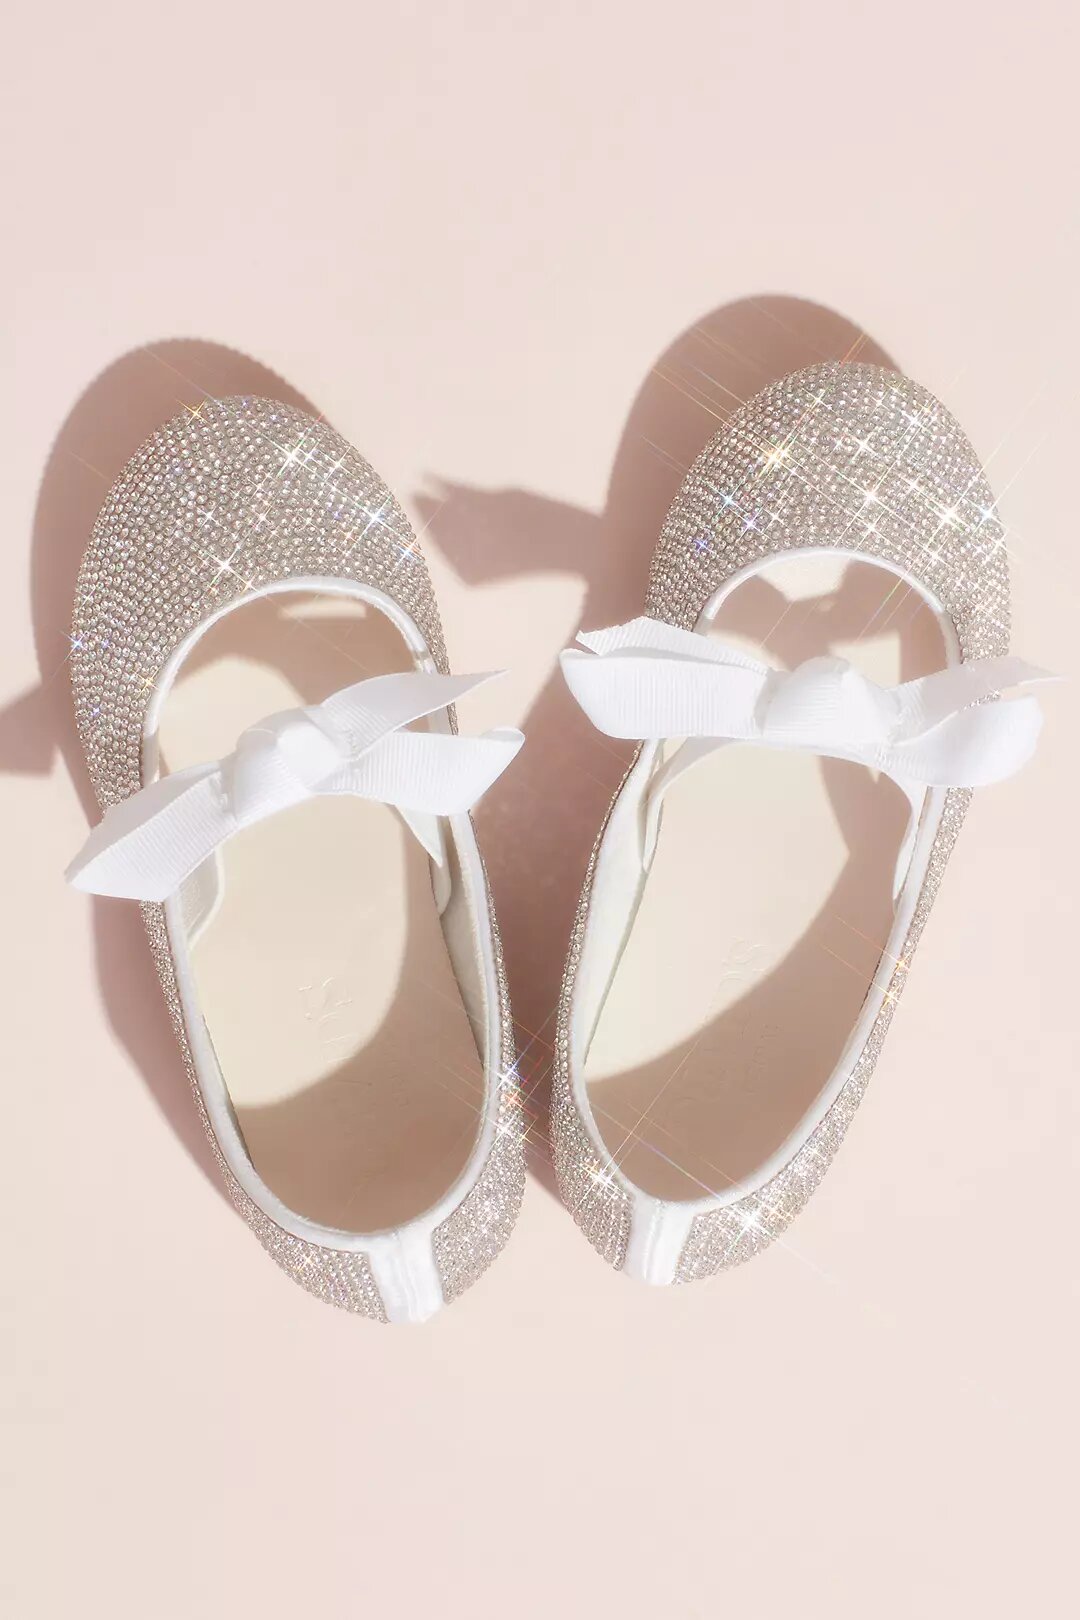 51% Off Girls Crystal Ballet Flats with Ribbon Bow $19.59 Shipped